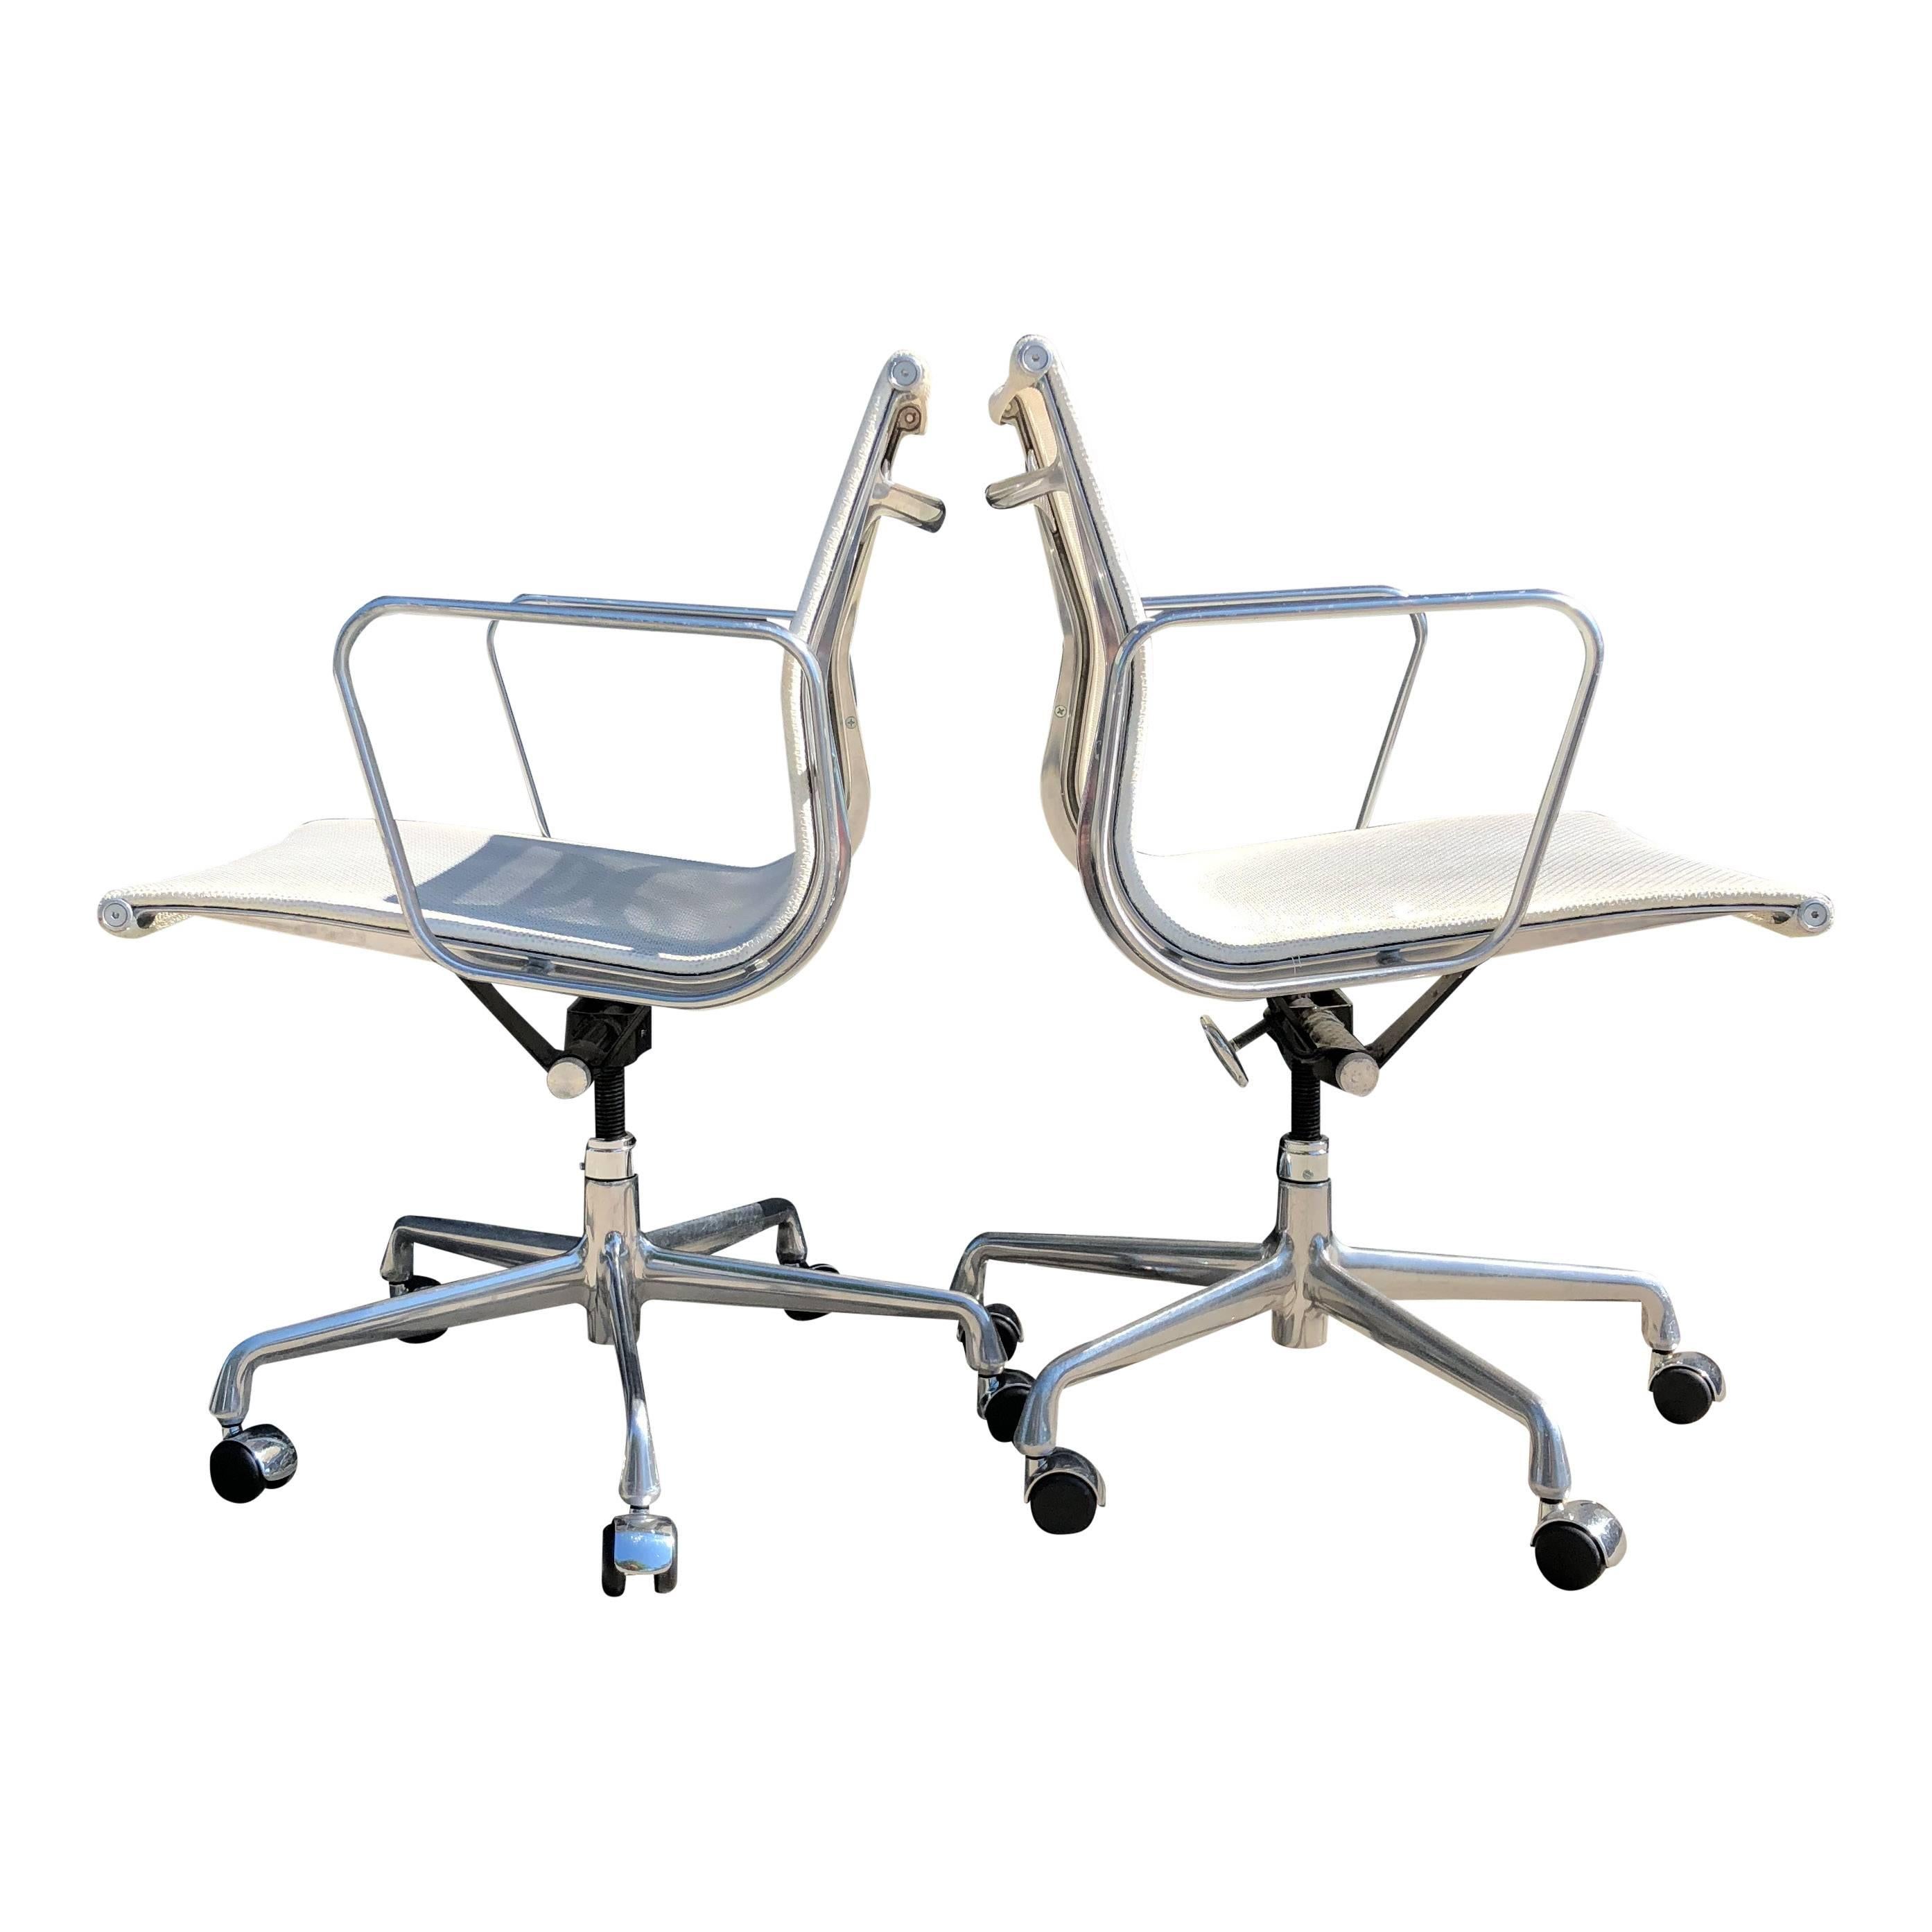 North American Eames for Herman Miller Aluminium Group Chairs in Mesh